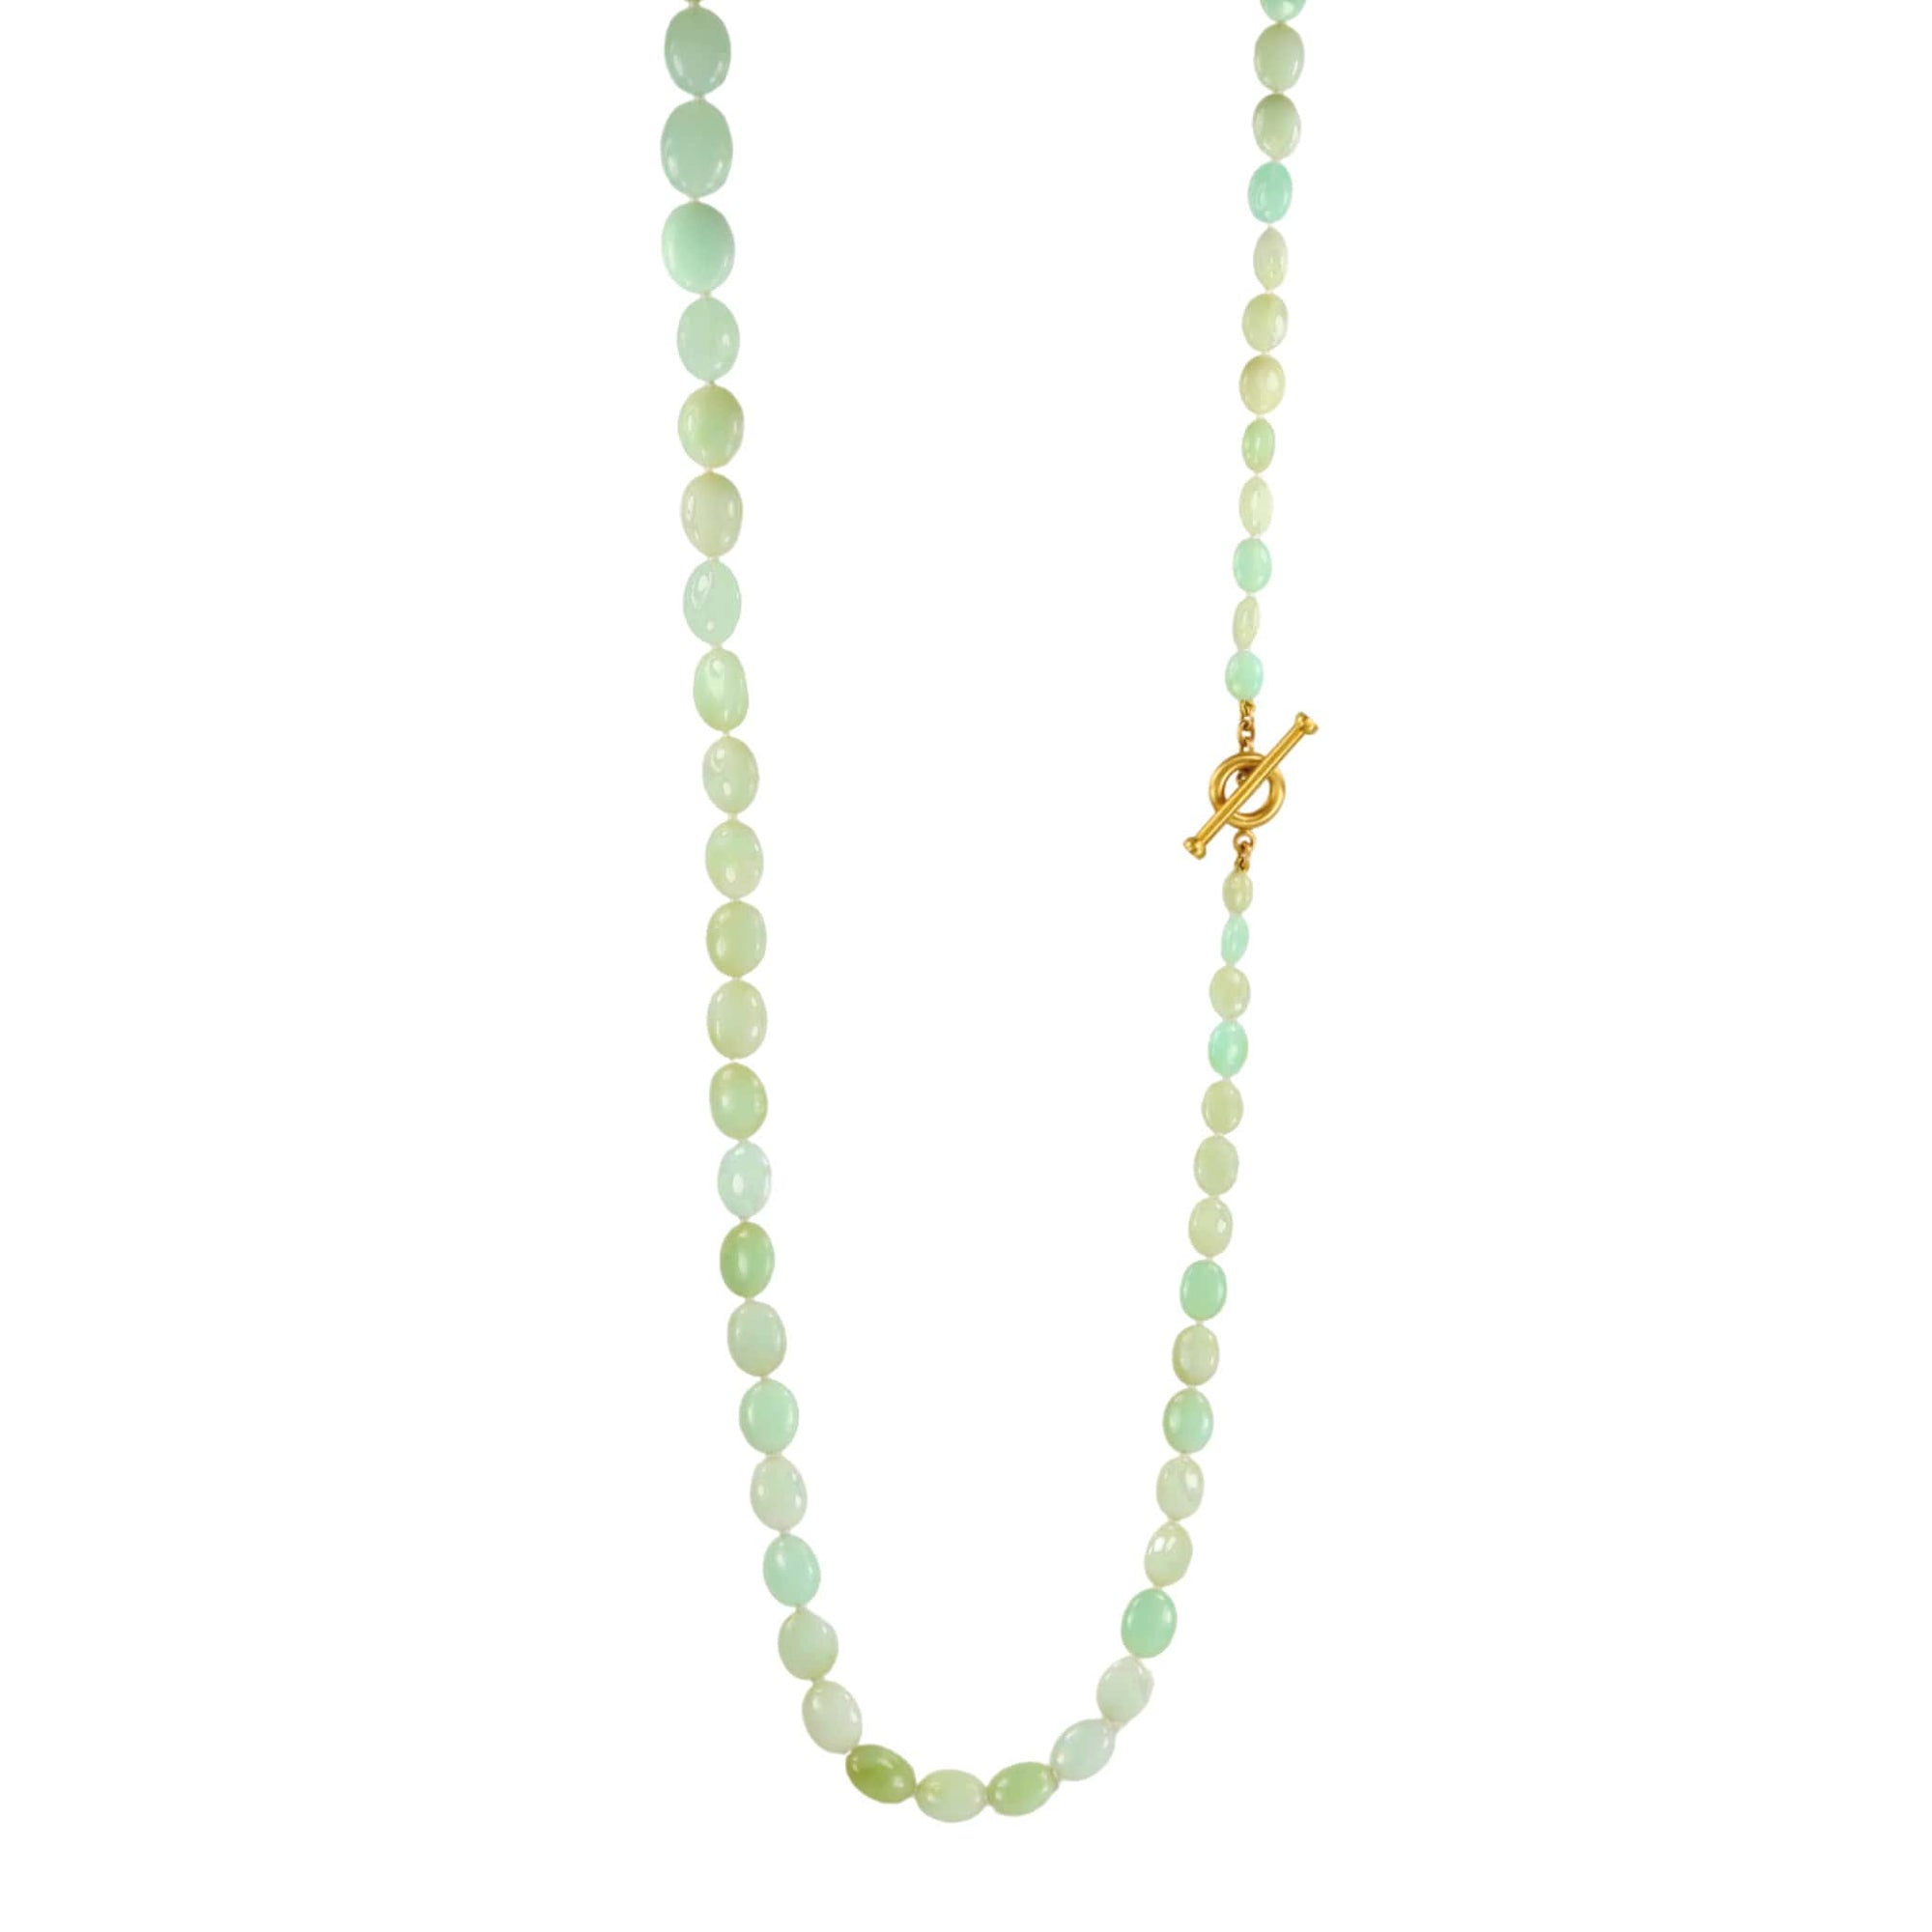 Caroline Ellen Smooth Oval Serbian Green Opal Beaded Necklace with 20K Gold Toggle Clasp